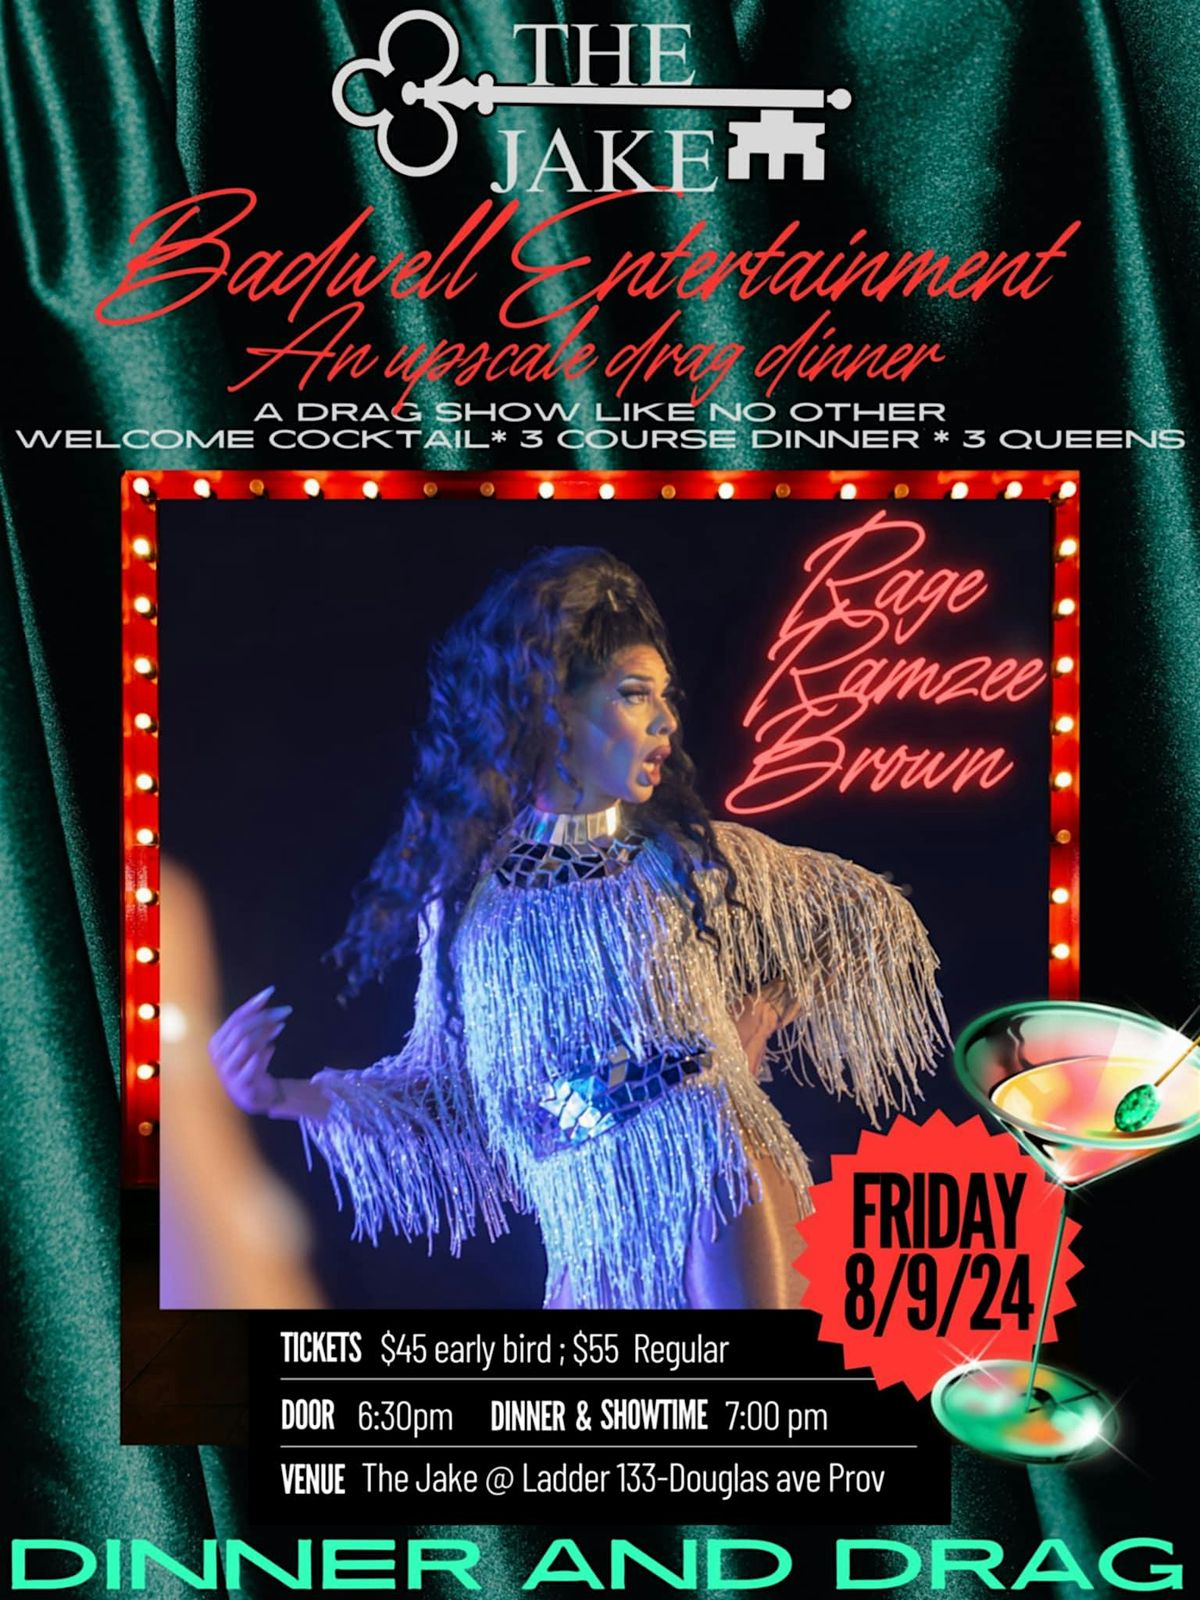 Upscale Dinner & Drag Experience (21+ event)